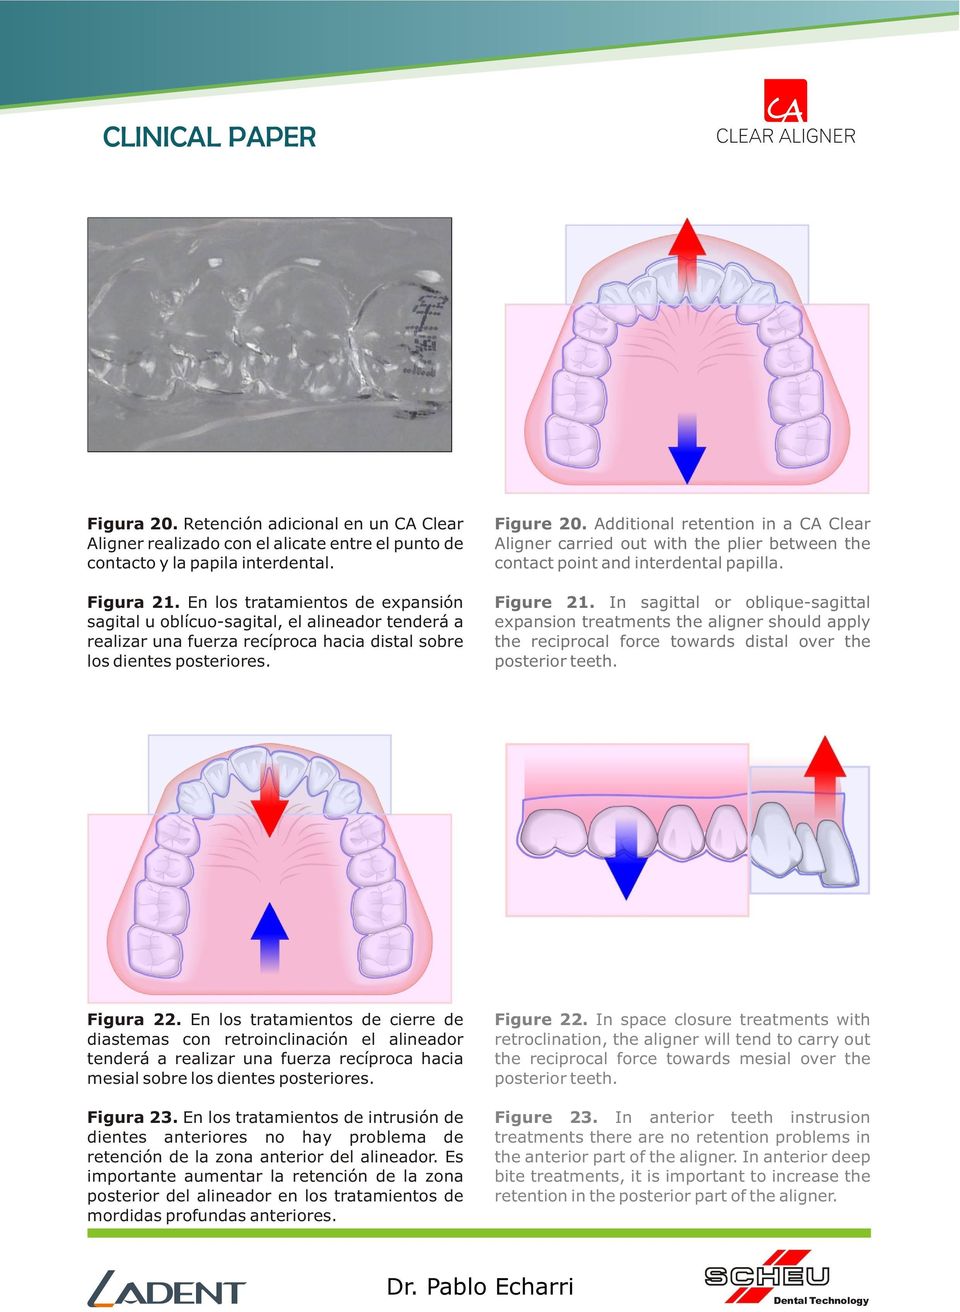 Additional retention in a CA Clear Aligner carried out with the plier between the contact point and interdental papilla. Figure 21.